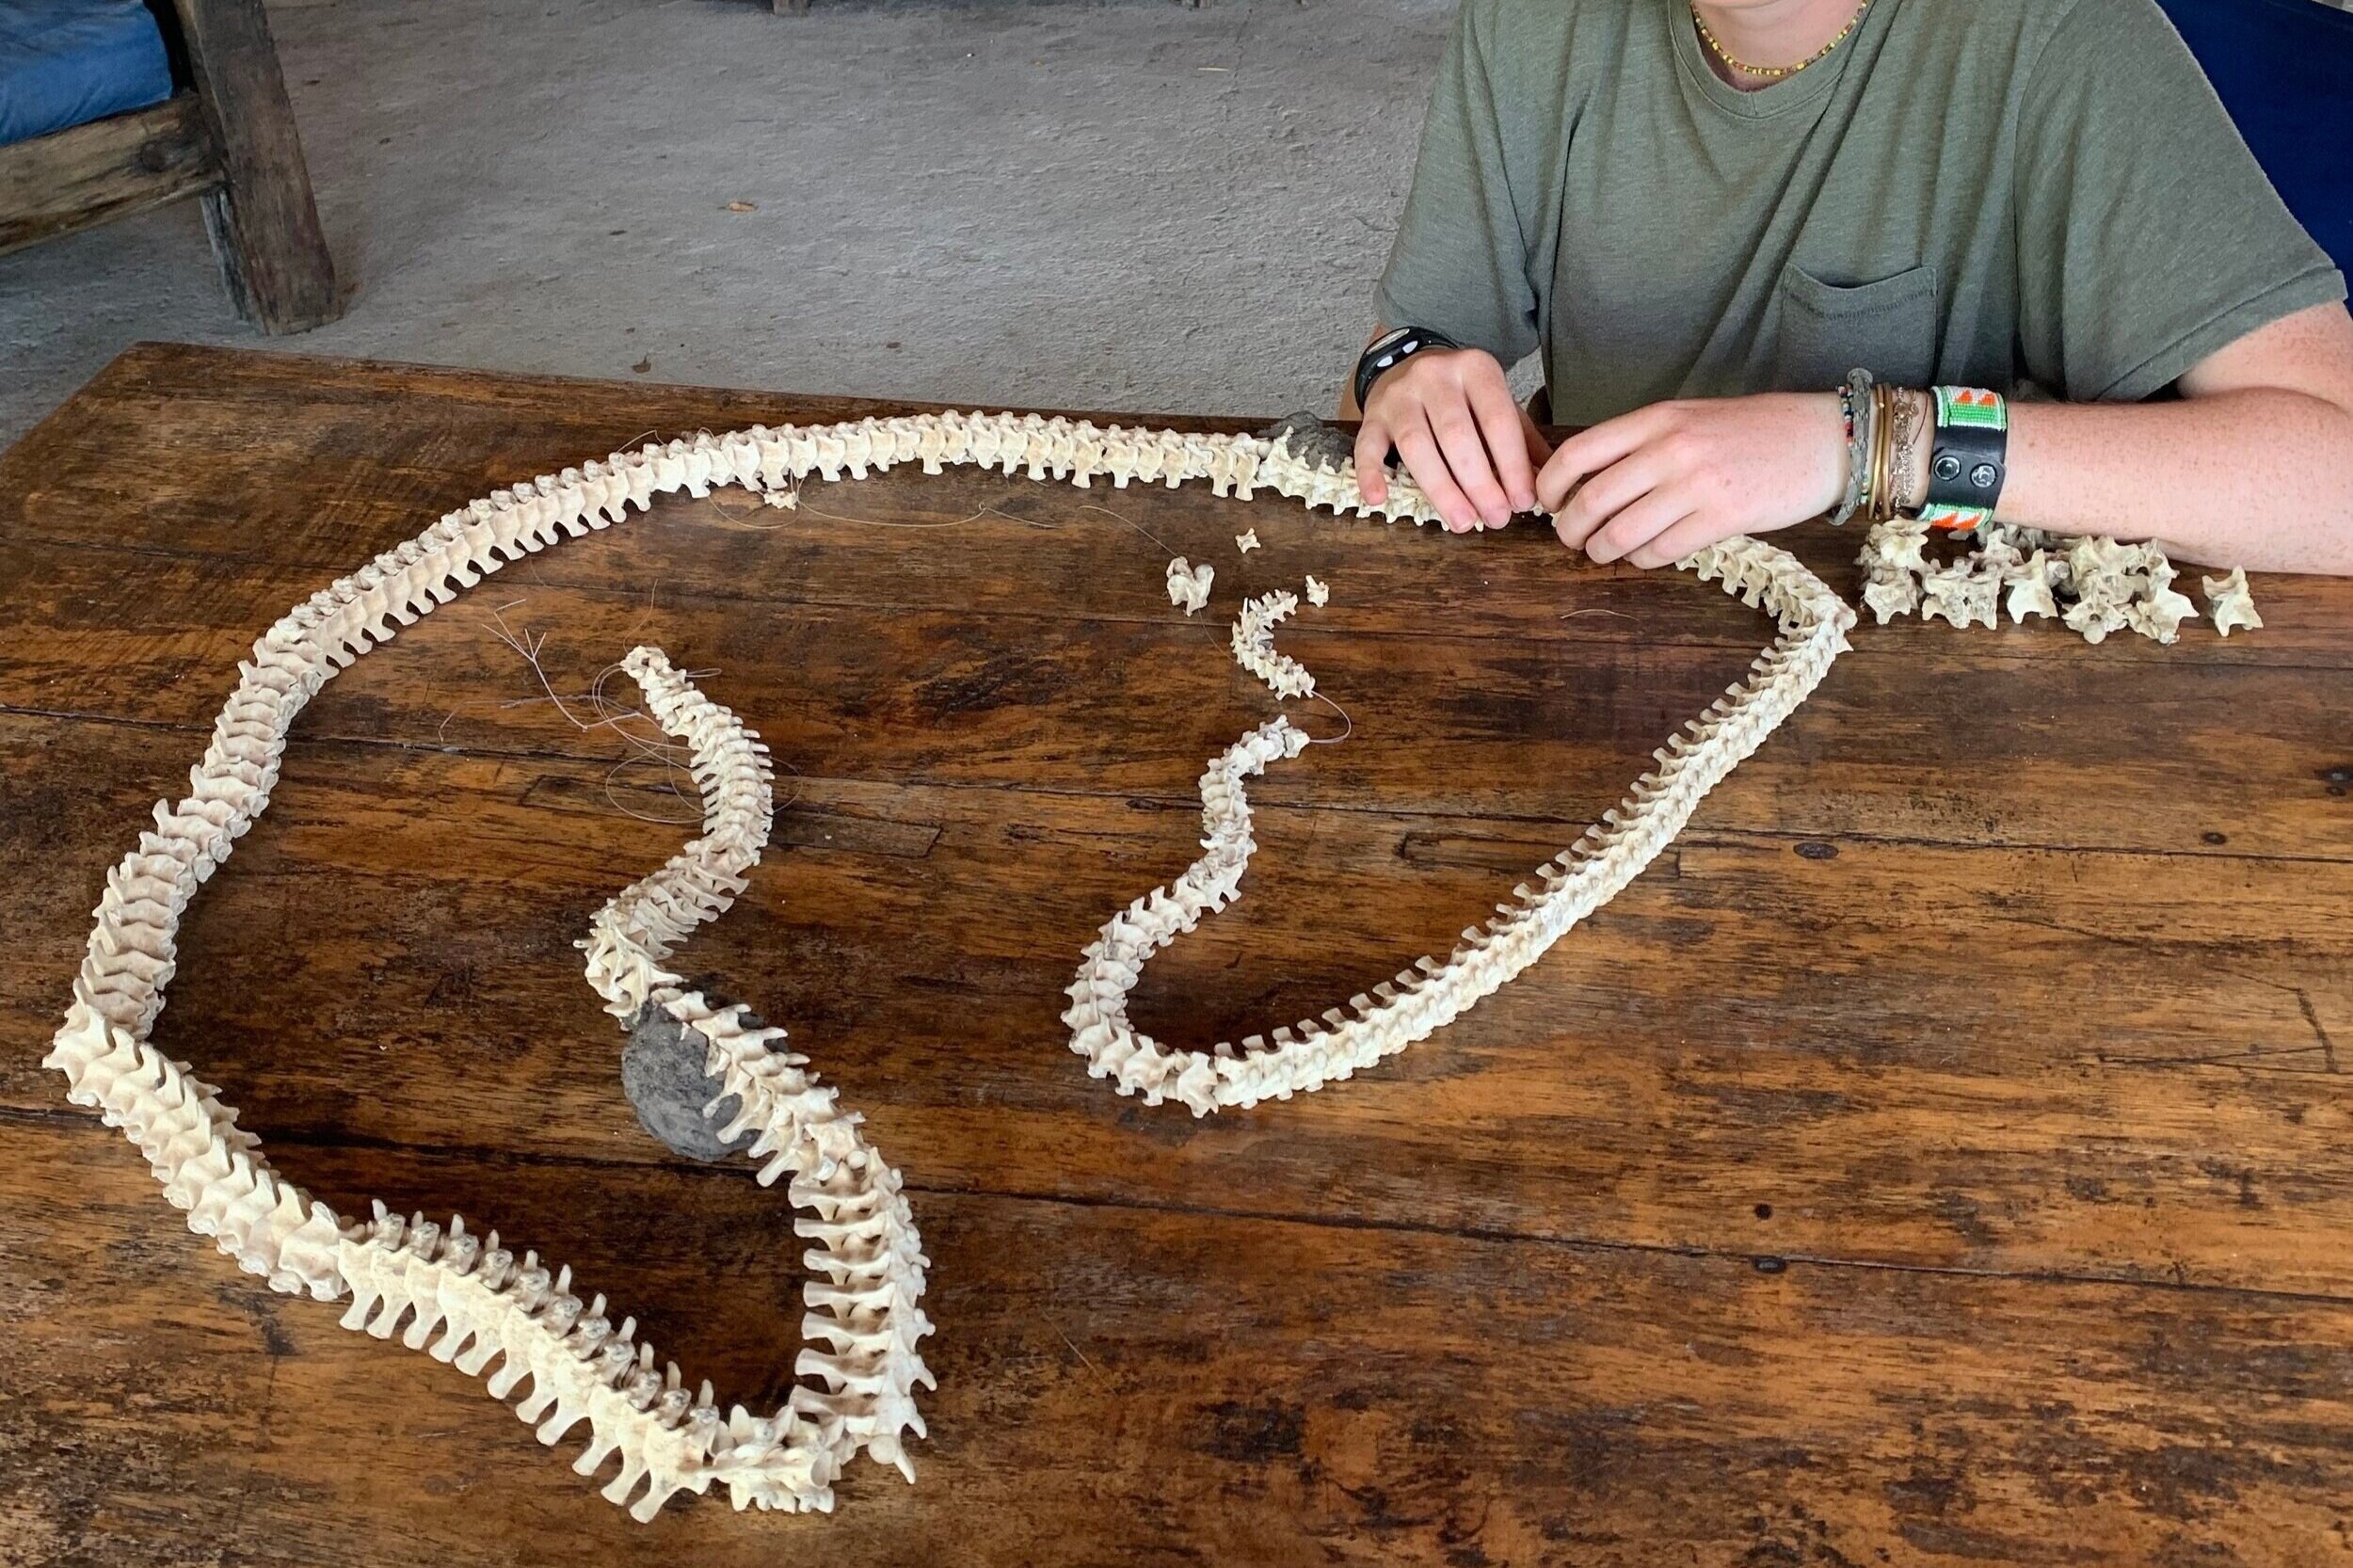  An attempt at assembling the vertebrae of a python skeleton. 